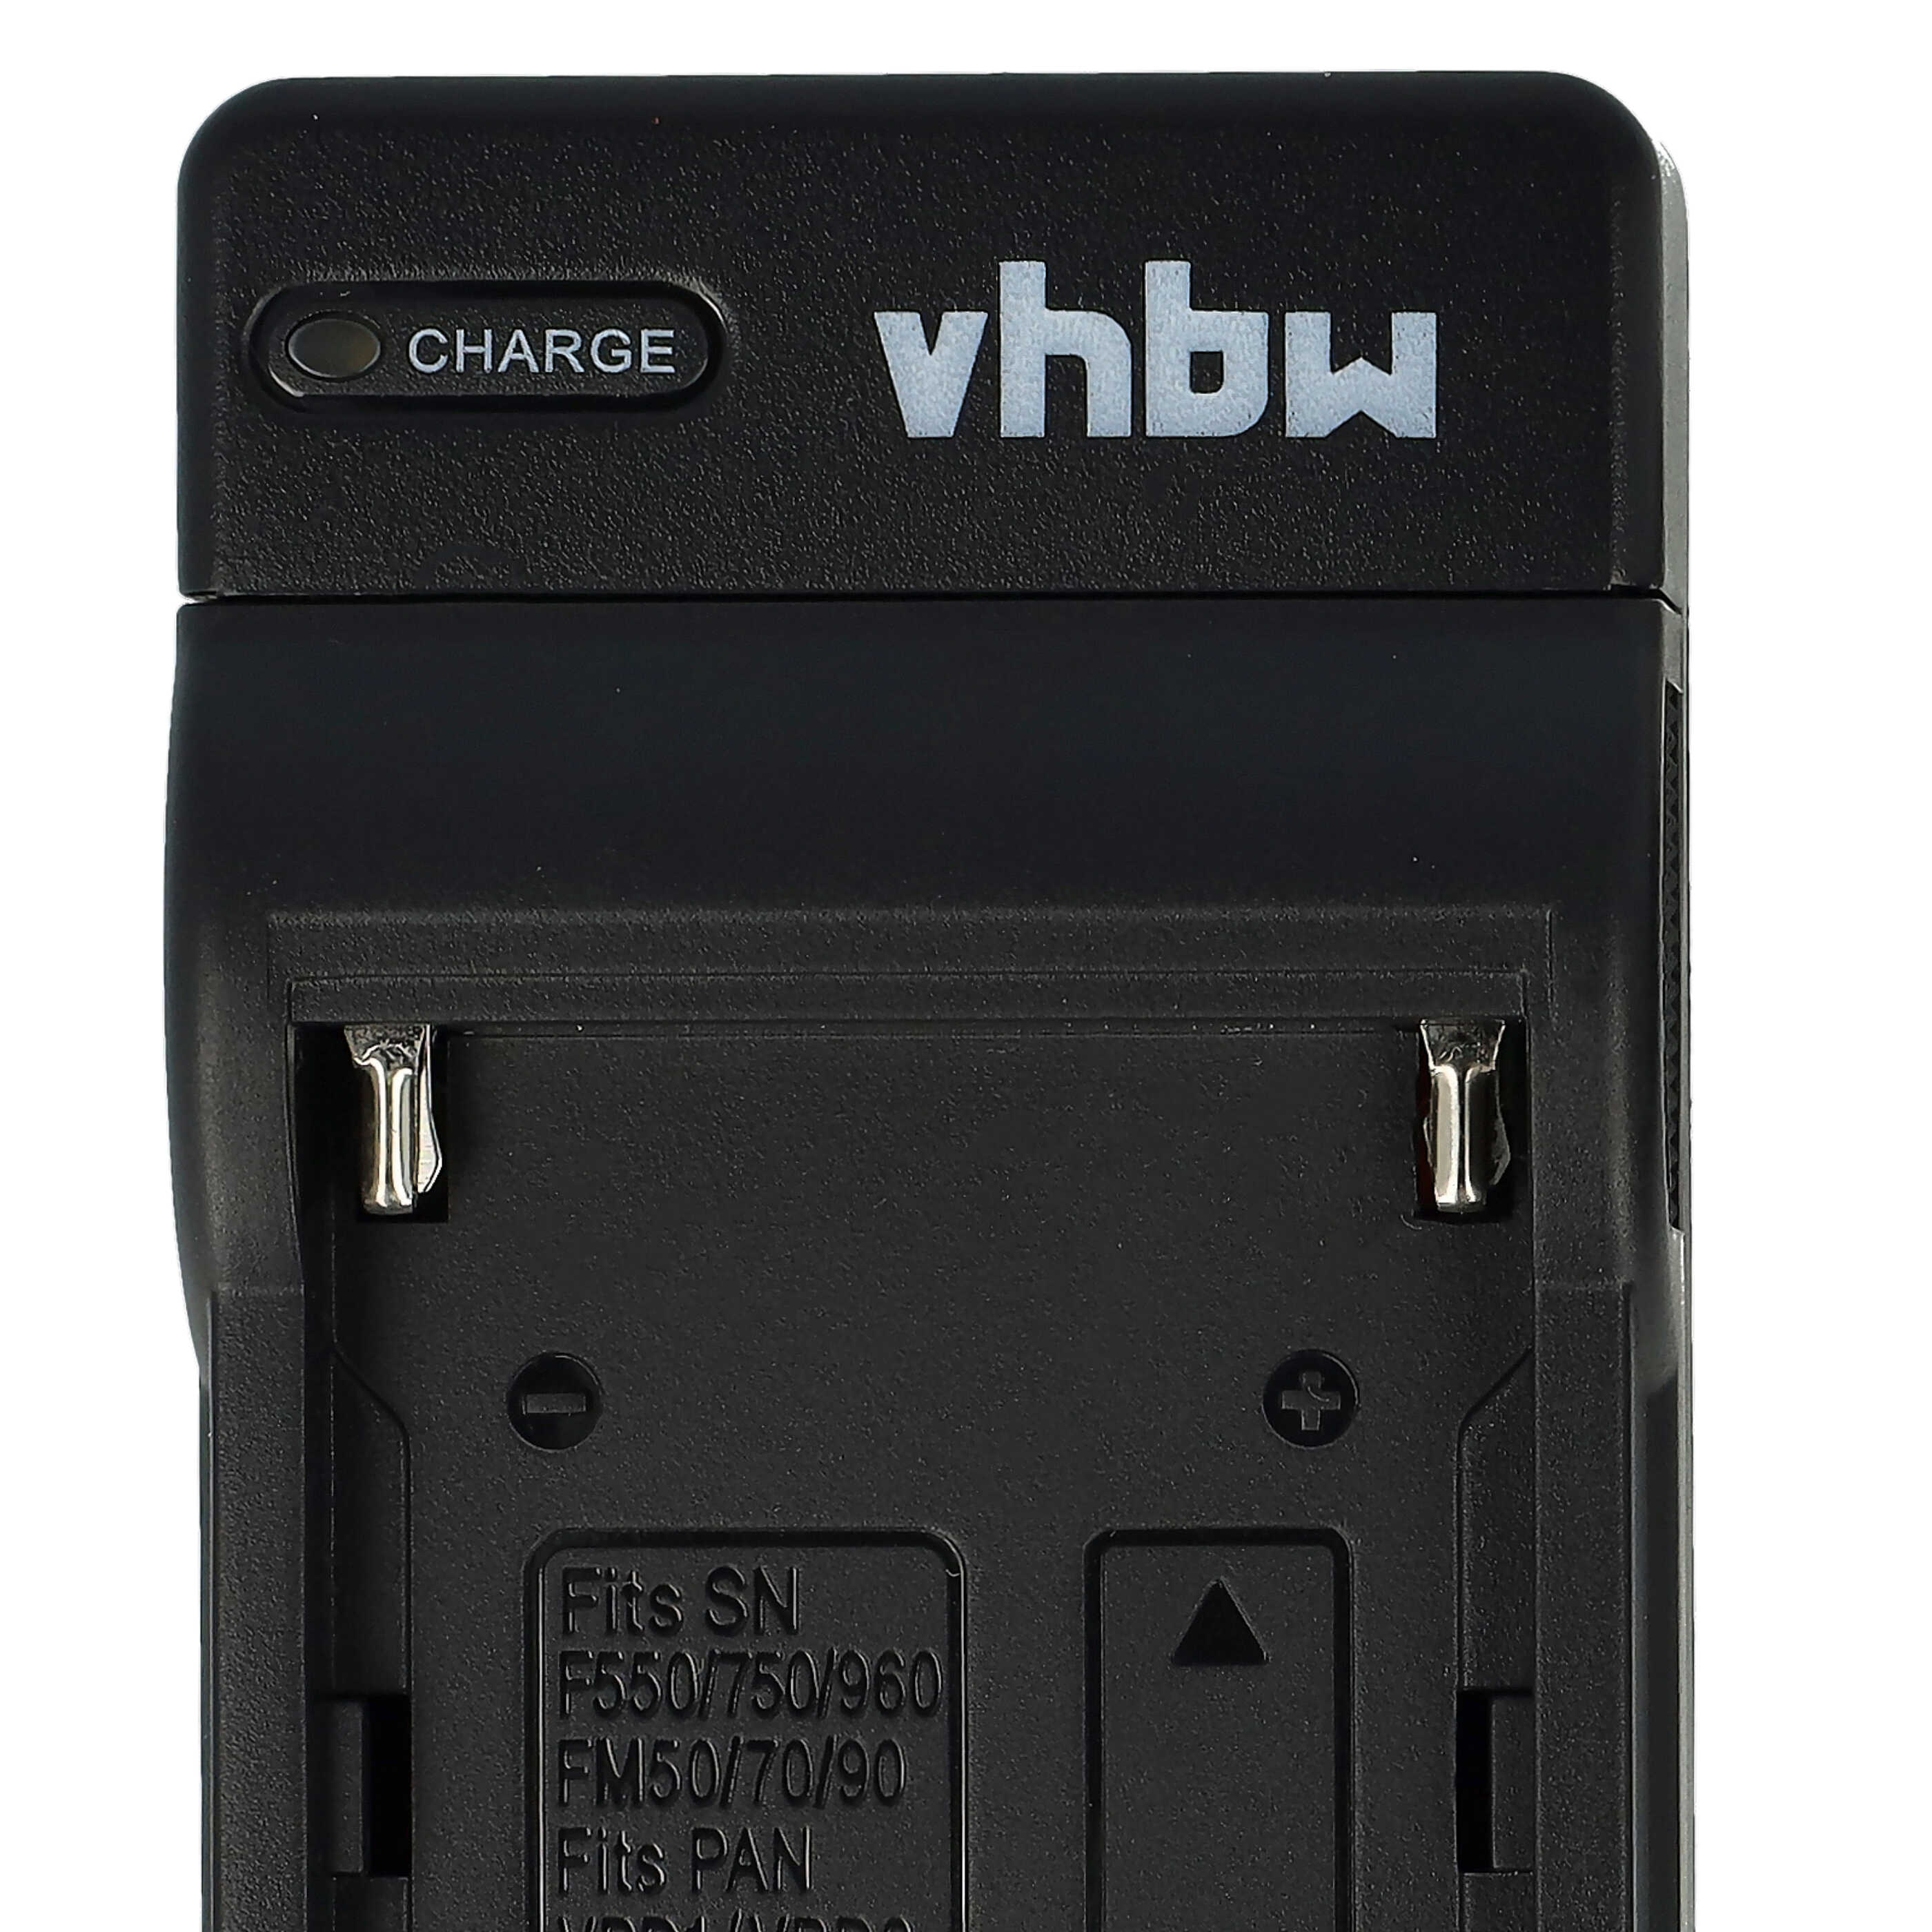 Battery Charger suitable for Hitachi Digital Camera - 0.5 A, 8.4 V